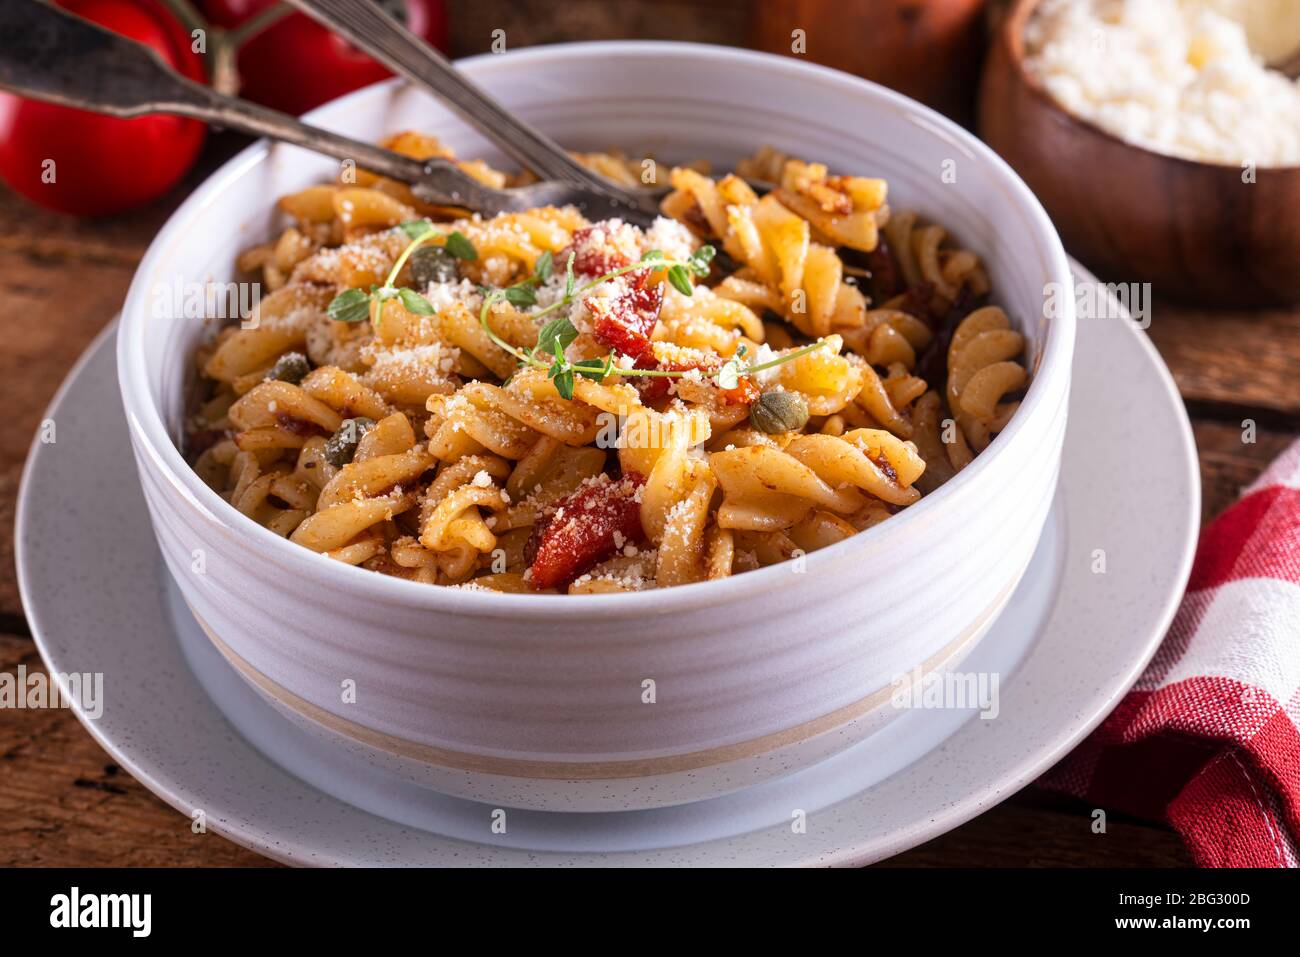 A bowl of delicious pasta puttanesca with rotini, anchovies, black olives, tomatoes and capers. Stock Photo